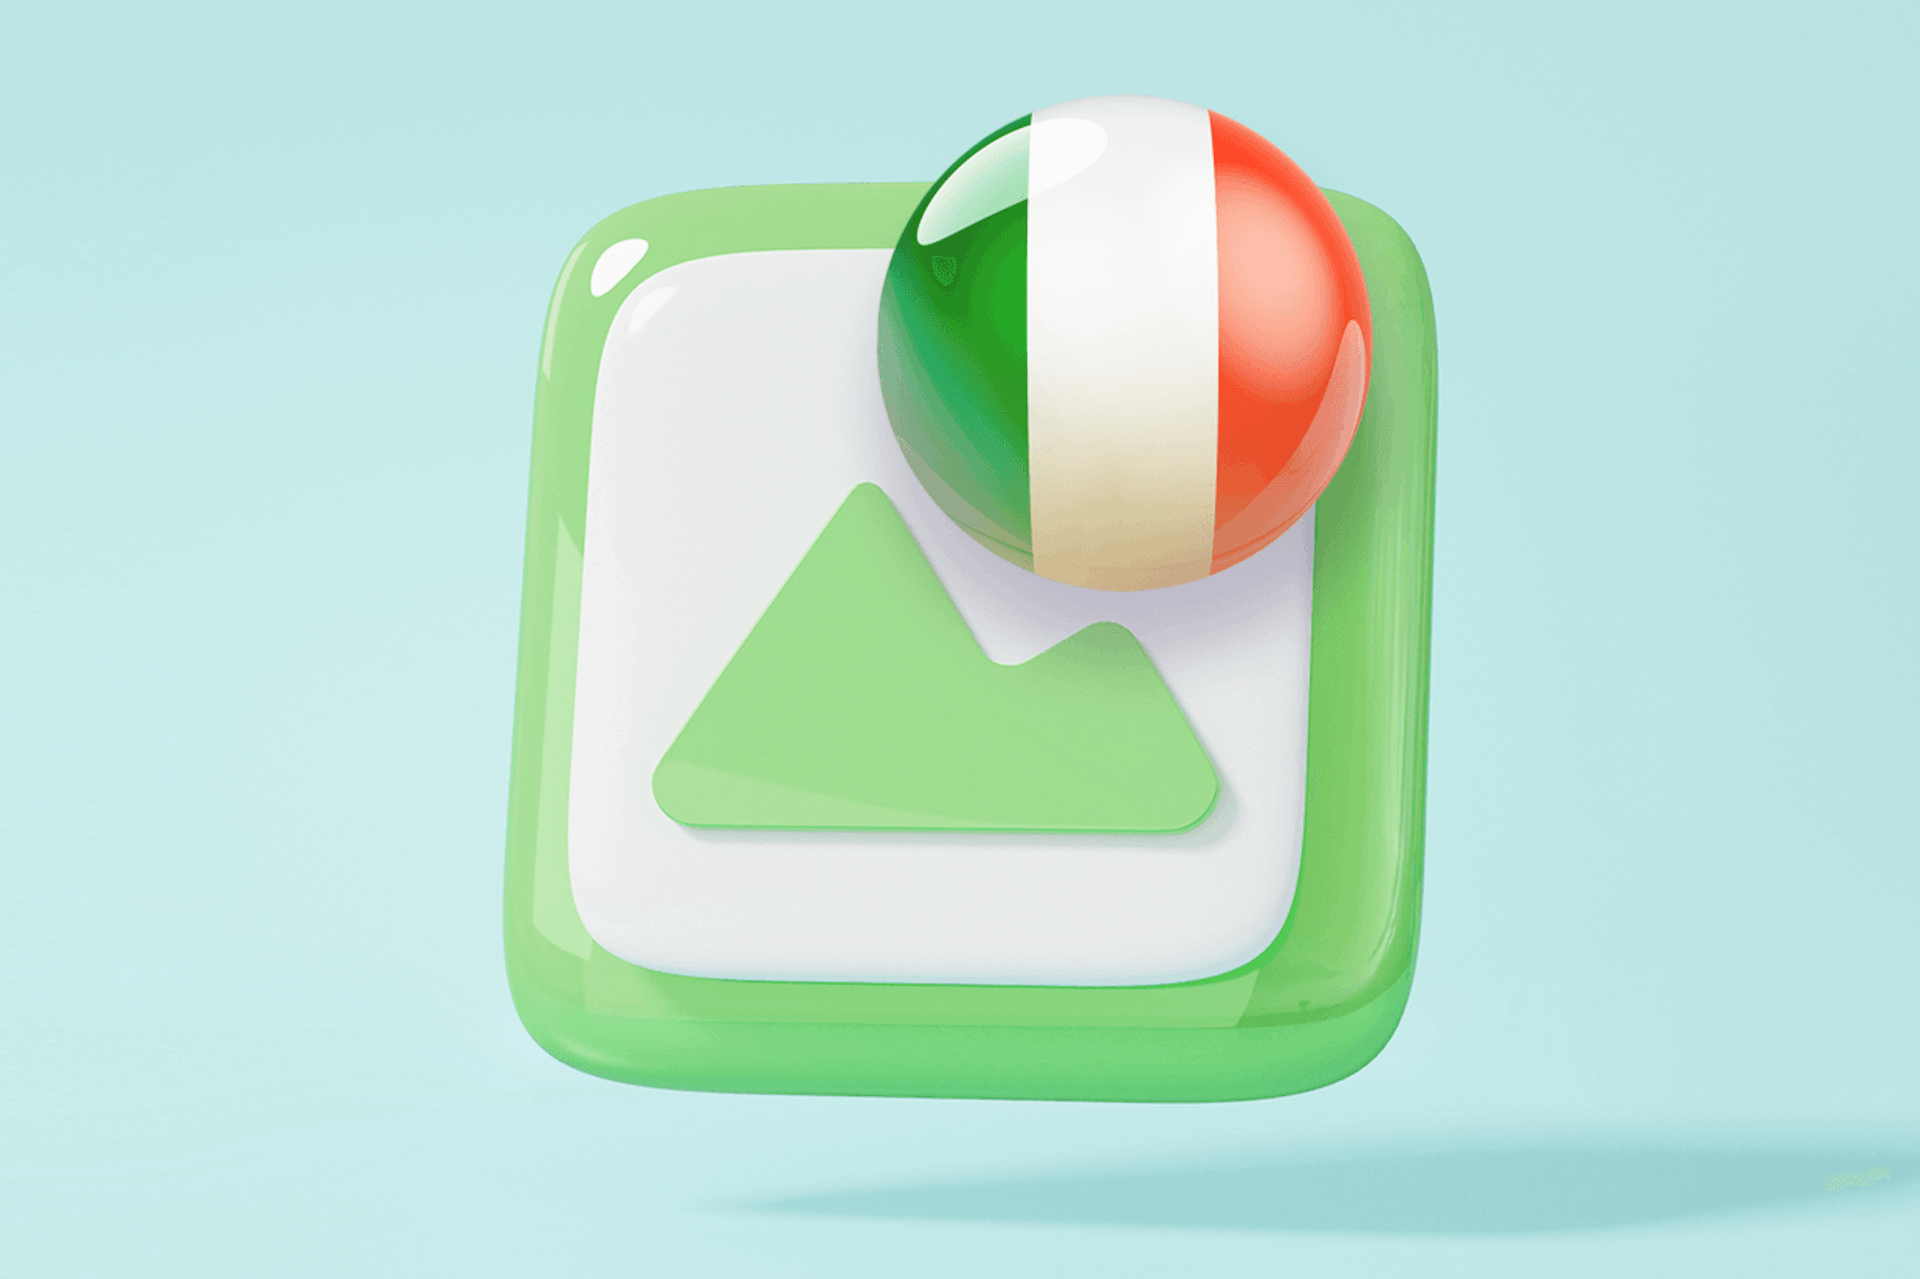 3D illustration of the Irish flag in front of a media item as the title image for our blog about the media landscape in ireland